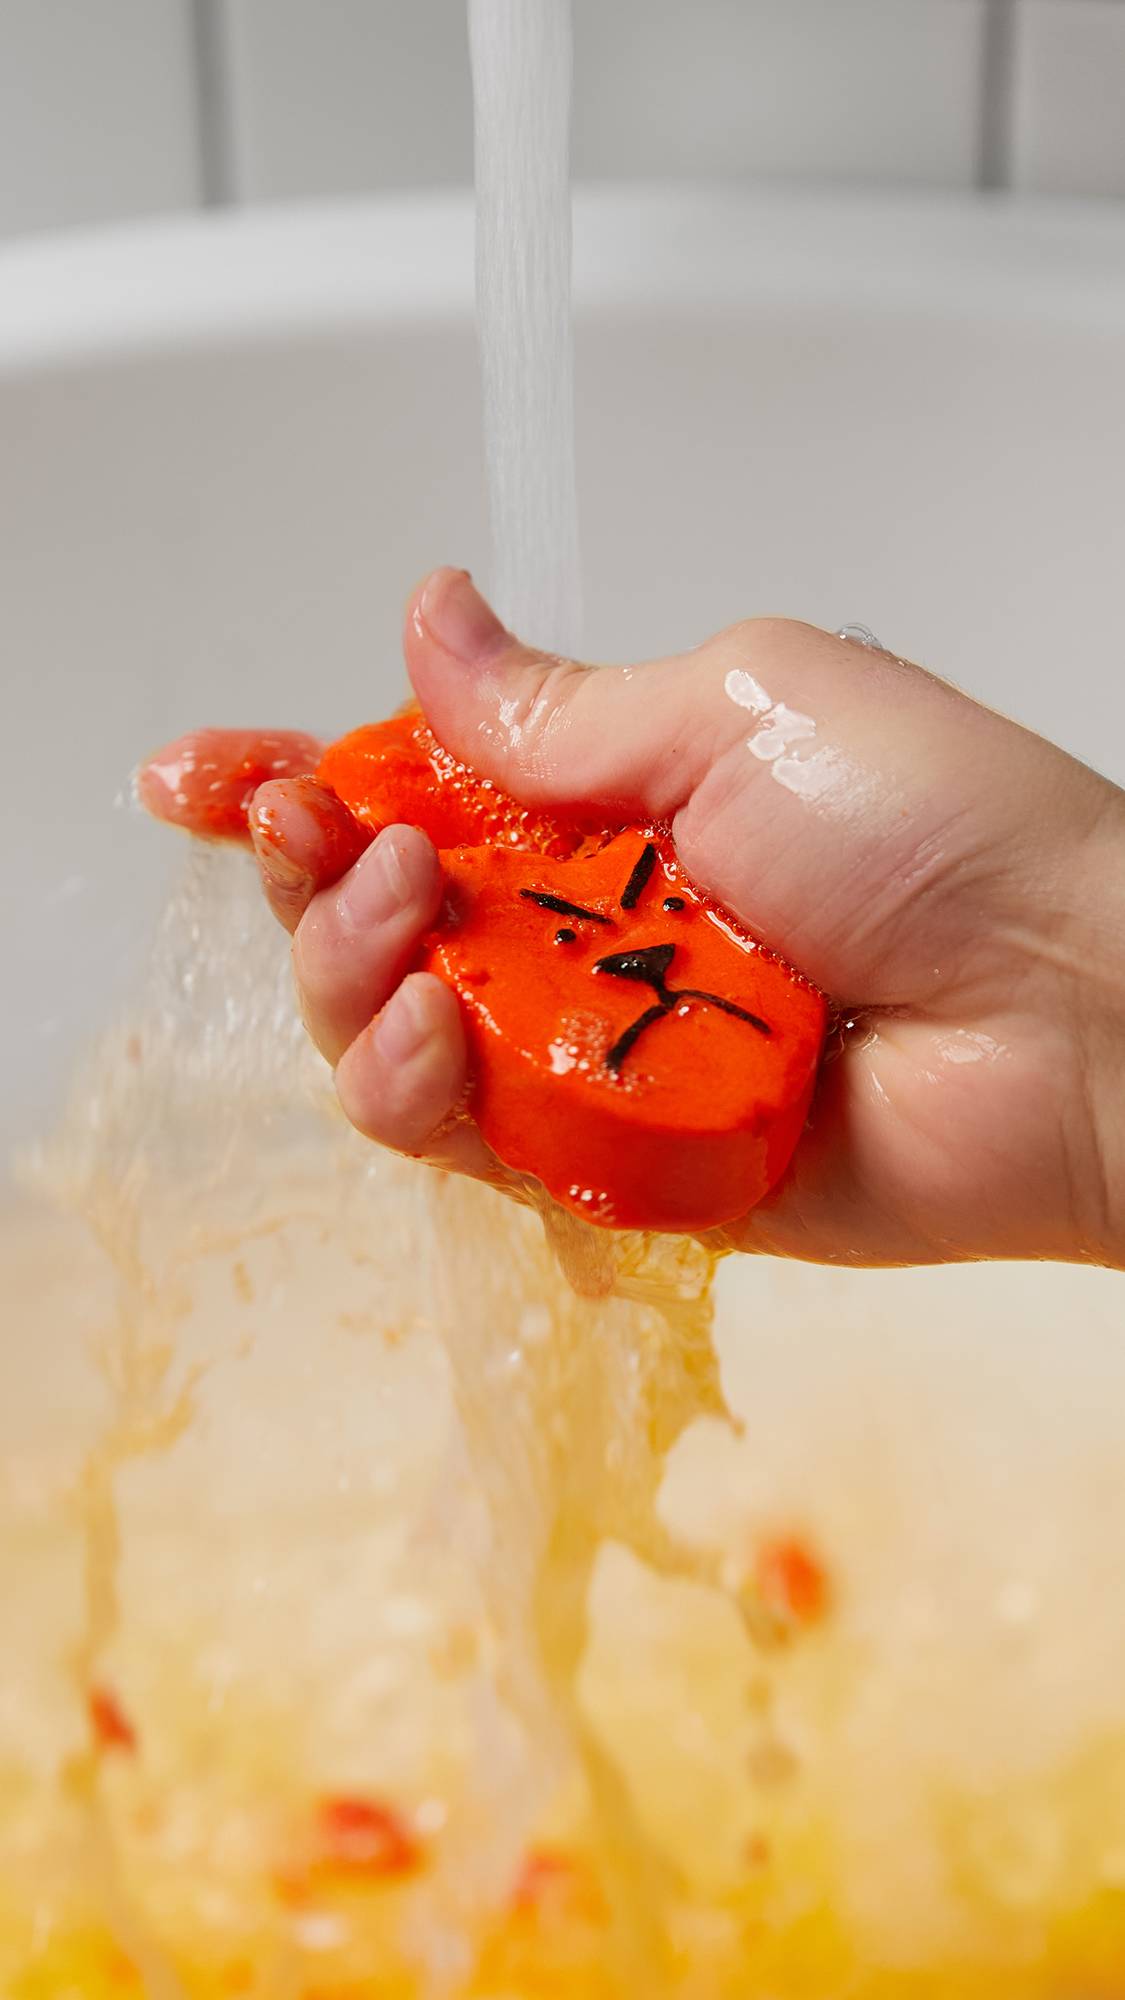 A close-up image of the model's hand crumbling the Hot Cross Bunny bubble bar under running water to create bubbly, orange waters below. 